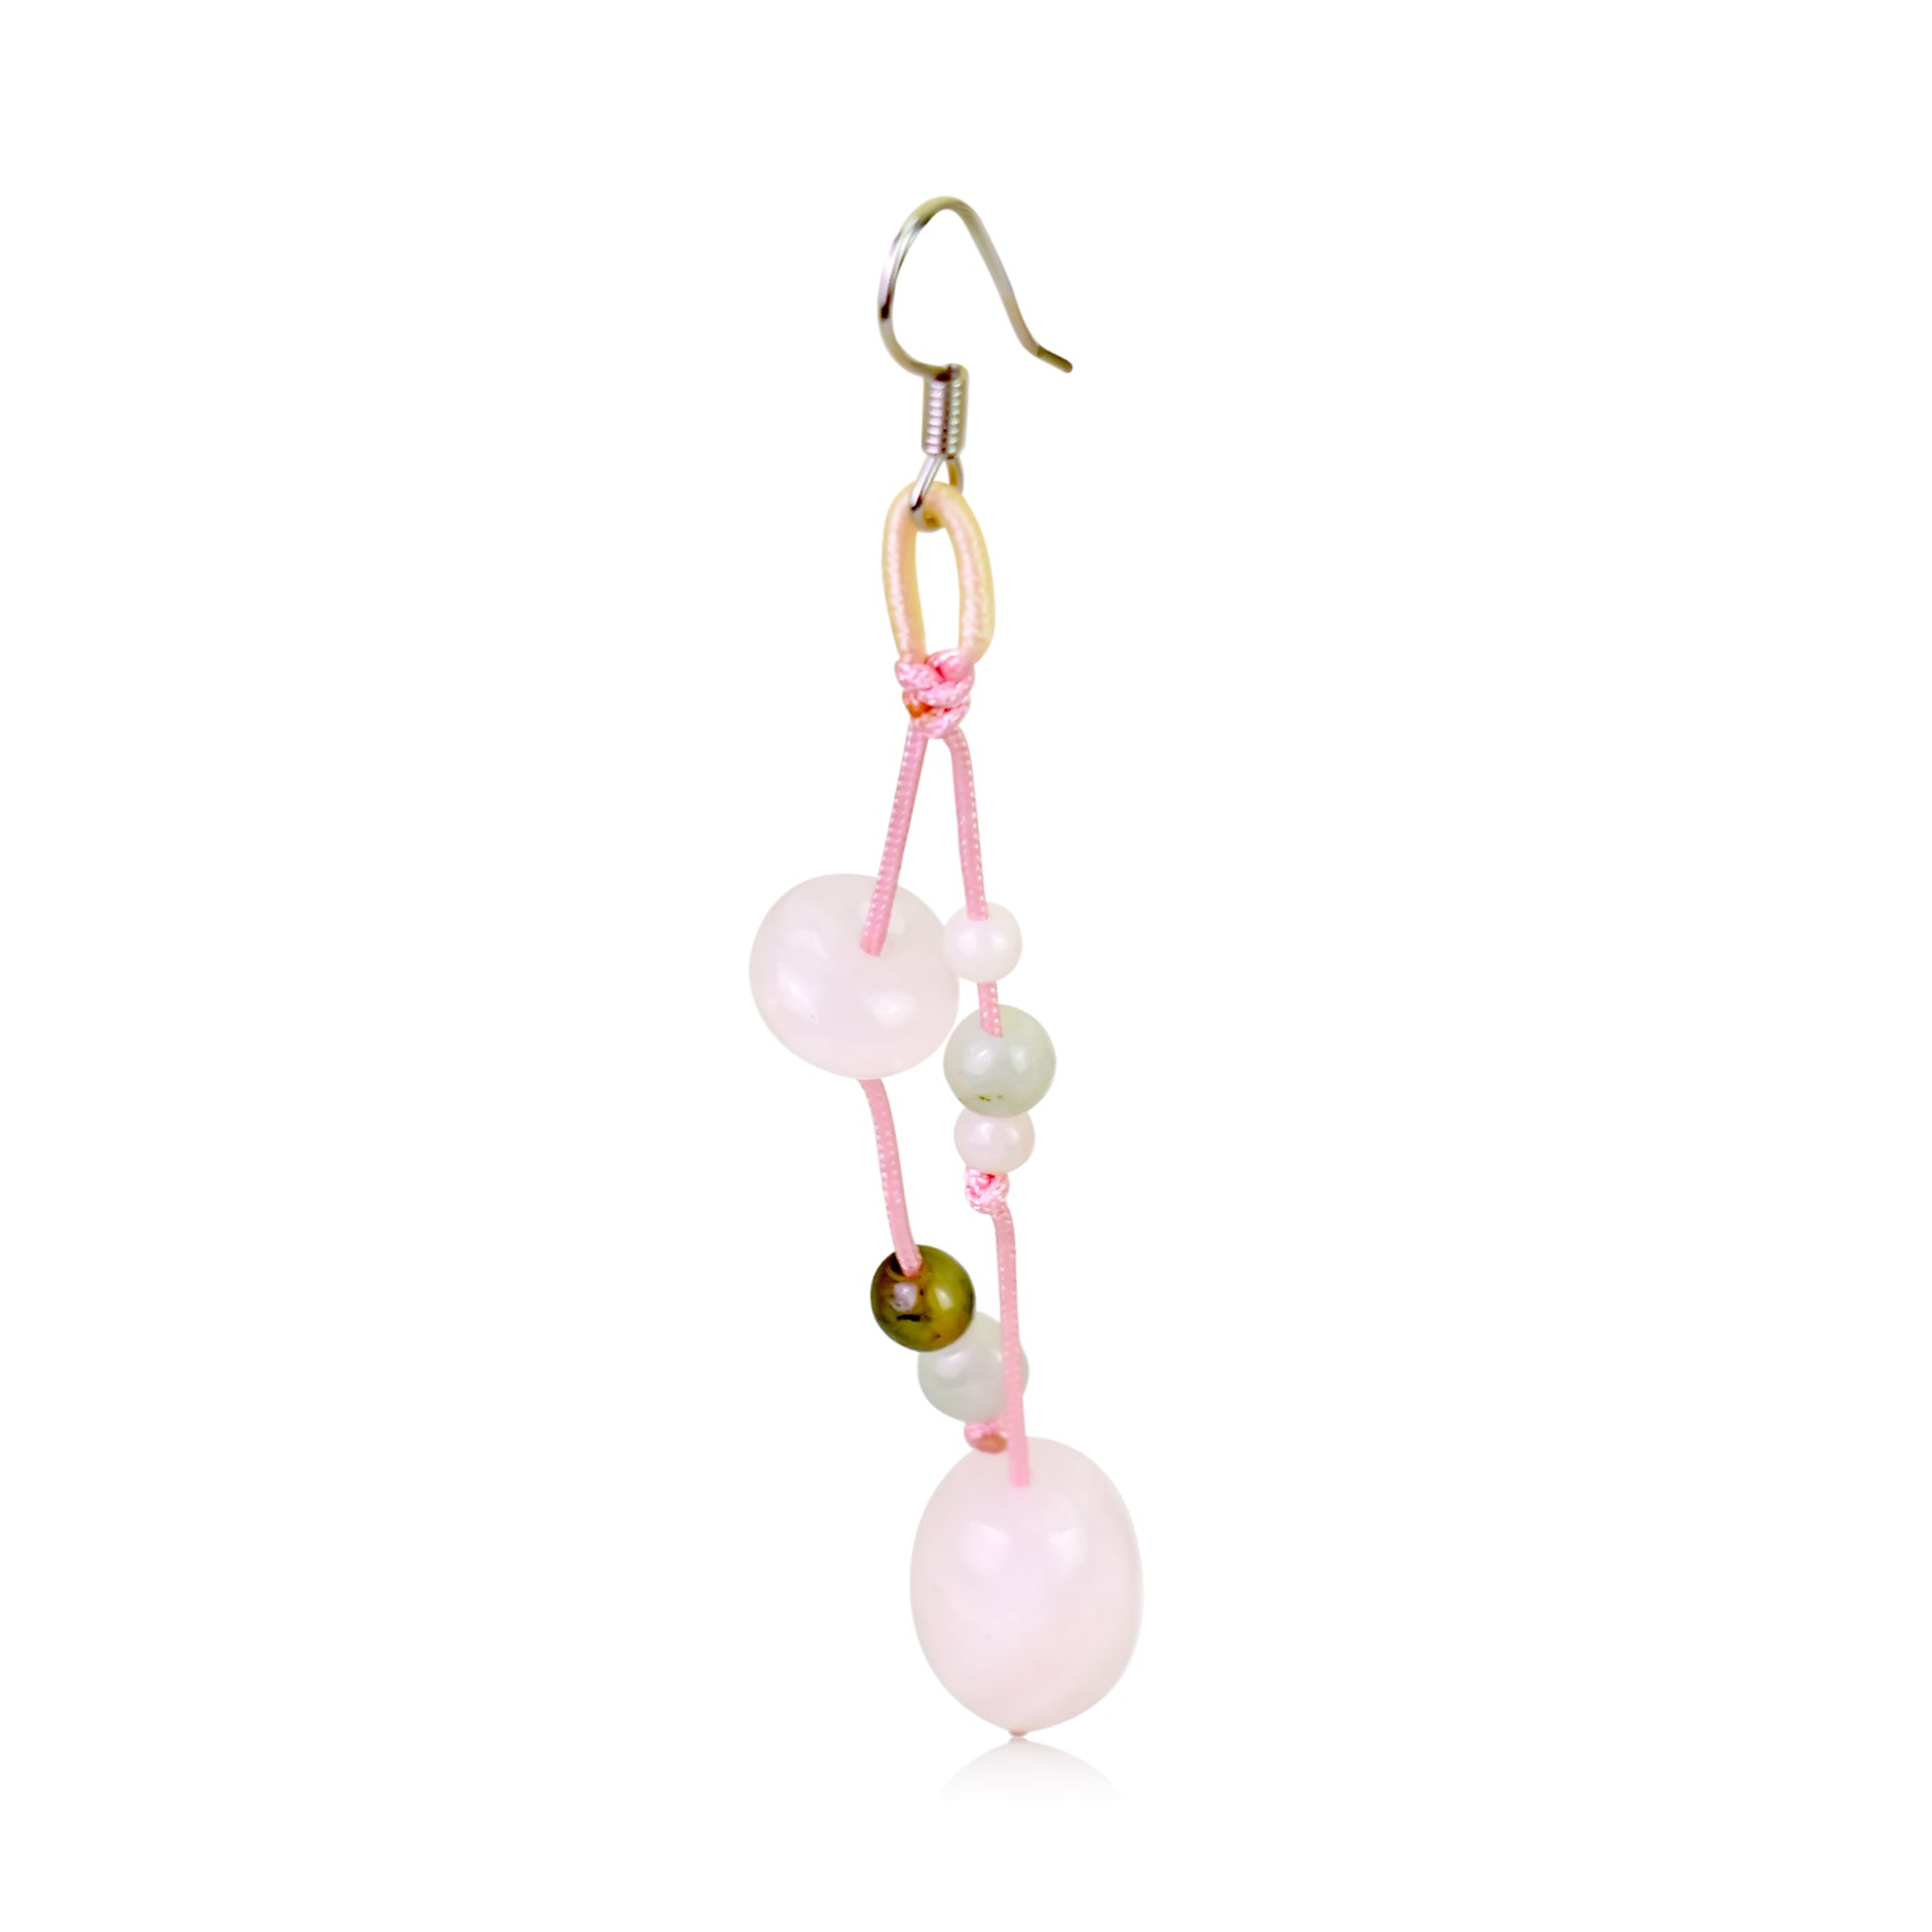 Put the Love into Your Look with Exquisite Rose Quartz Earrings made with Pink Cord